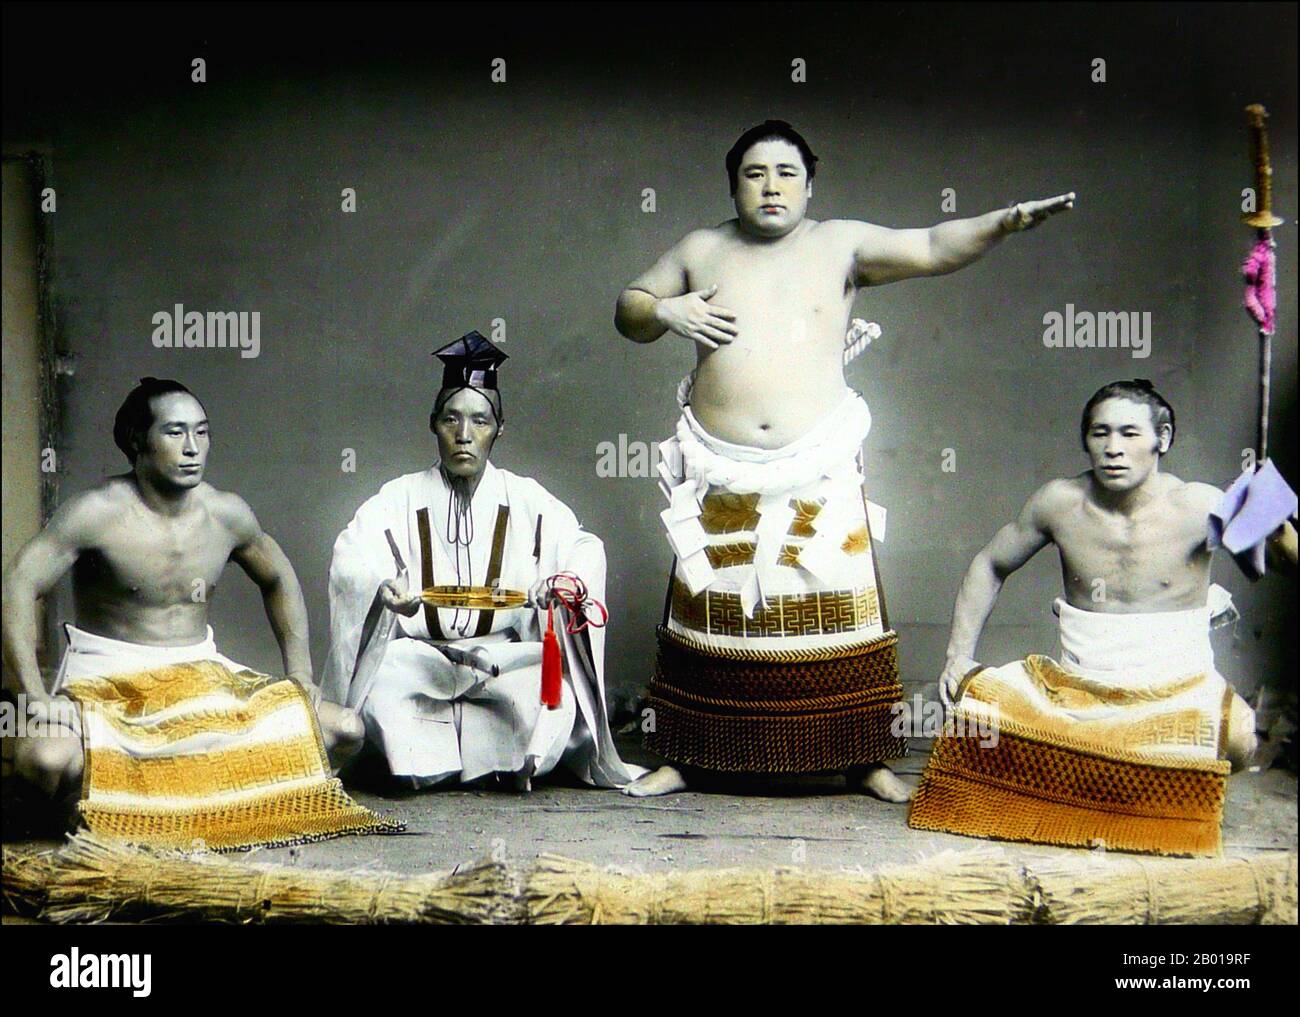 Japan: Three sumo wrestlers (rikishi) and a referee (gyoji). Photo by T. Enami (1859-1929), c. 1892-1895.  T. Enami (Enami Nobukuni) was the trade name of a celebrated Meiji period photographer. The T. of his trade name is thought to have stood for Toshi, though he never spelled it out on any personal or business document.  Born in Edo (now Tokyo) during the Bakumatsu era, Enami was first a student of, and then an assistant to the well known photographer and collotypist, Ogawa Kazumasa. Enami relocated to Yokohama, and opened a studio on Benten-dōri (Benten Street) in 1892. Stock Photo